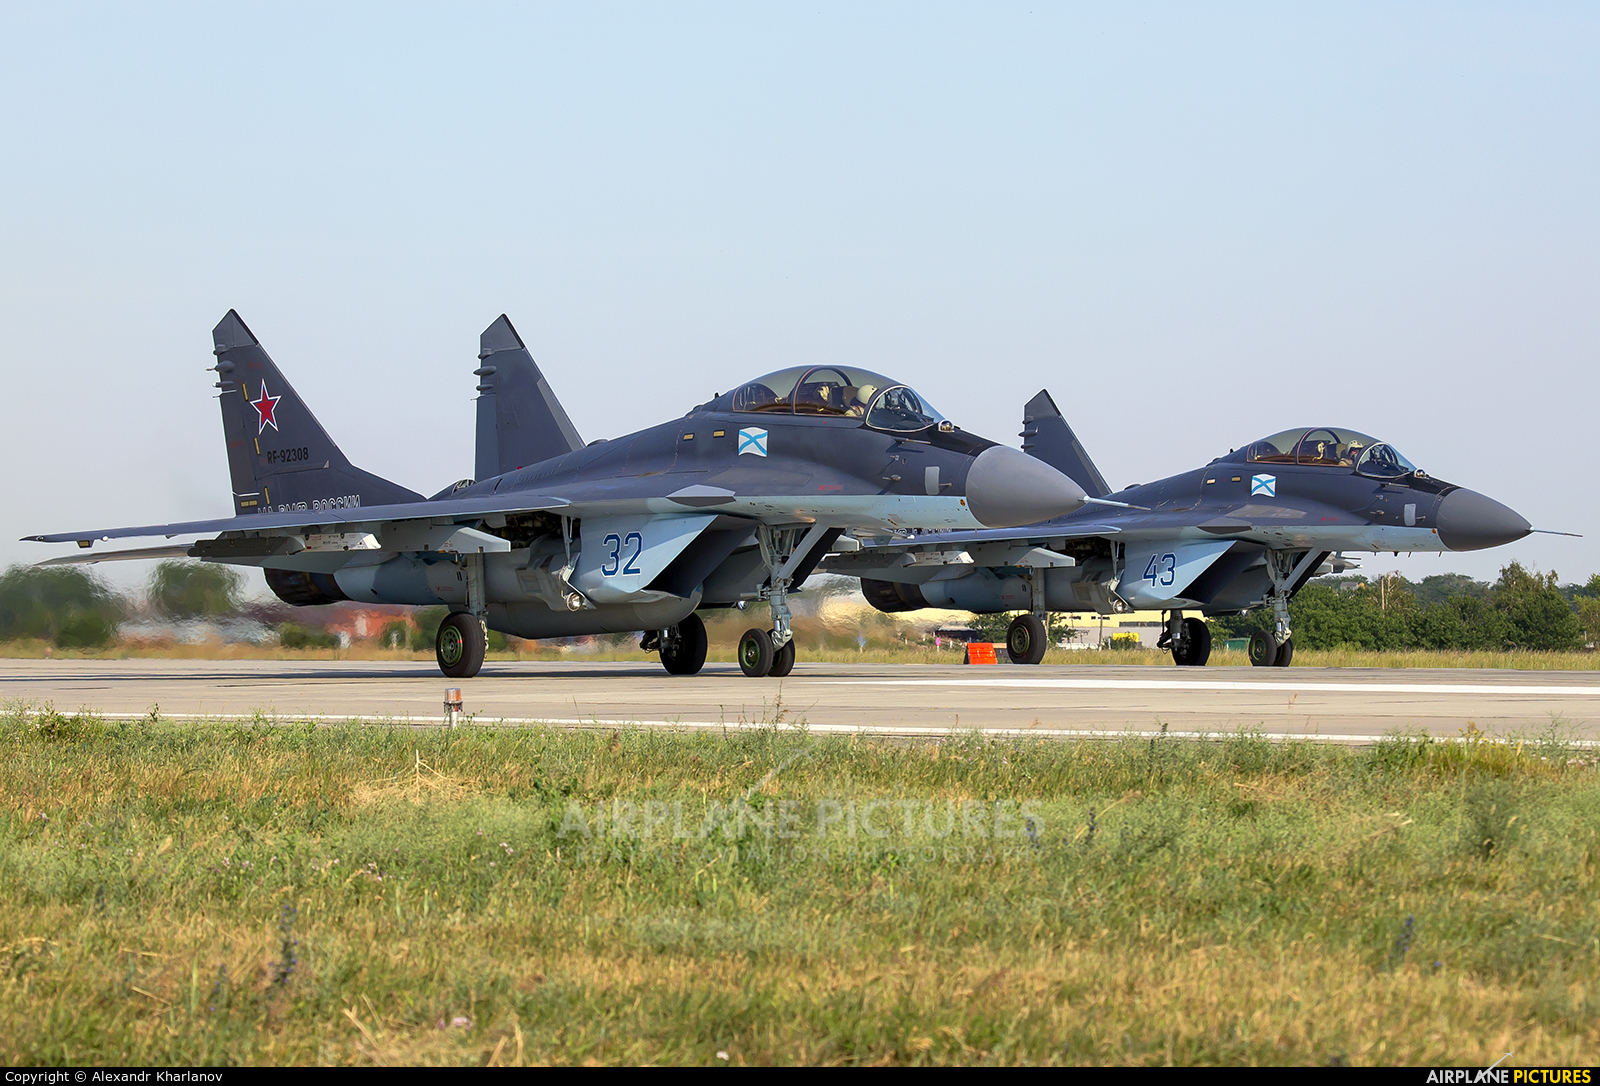 Russia - Navy 32 aircraft at Undisclosed Location